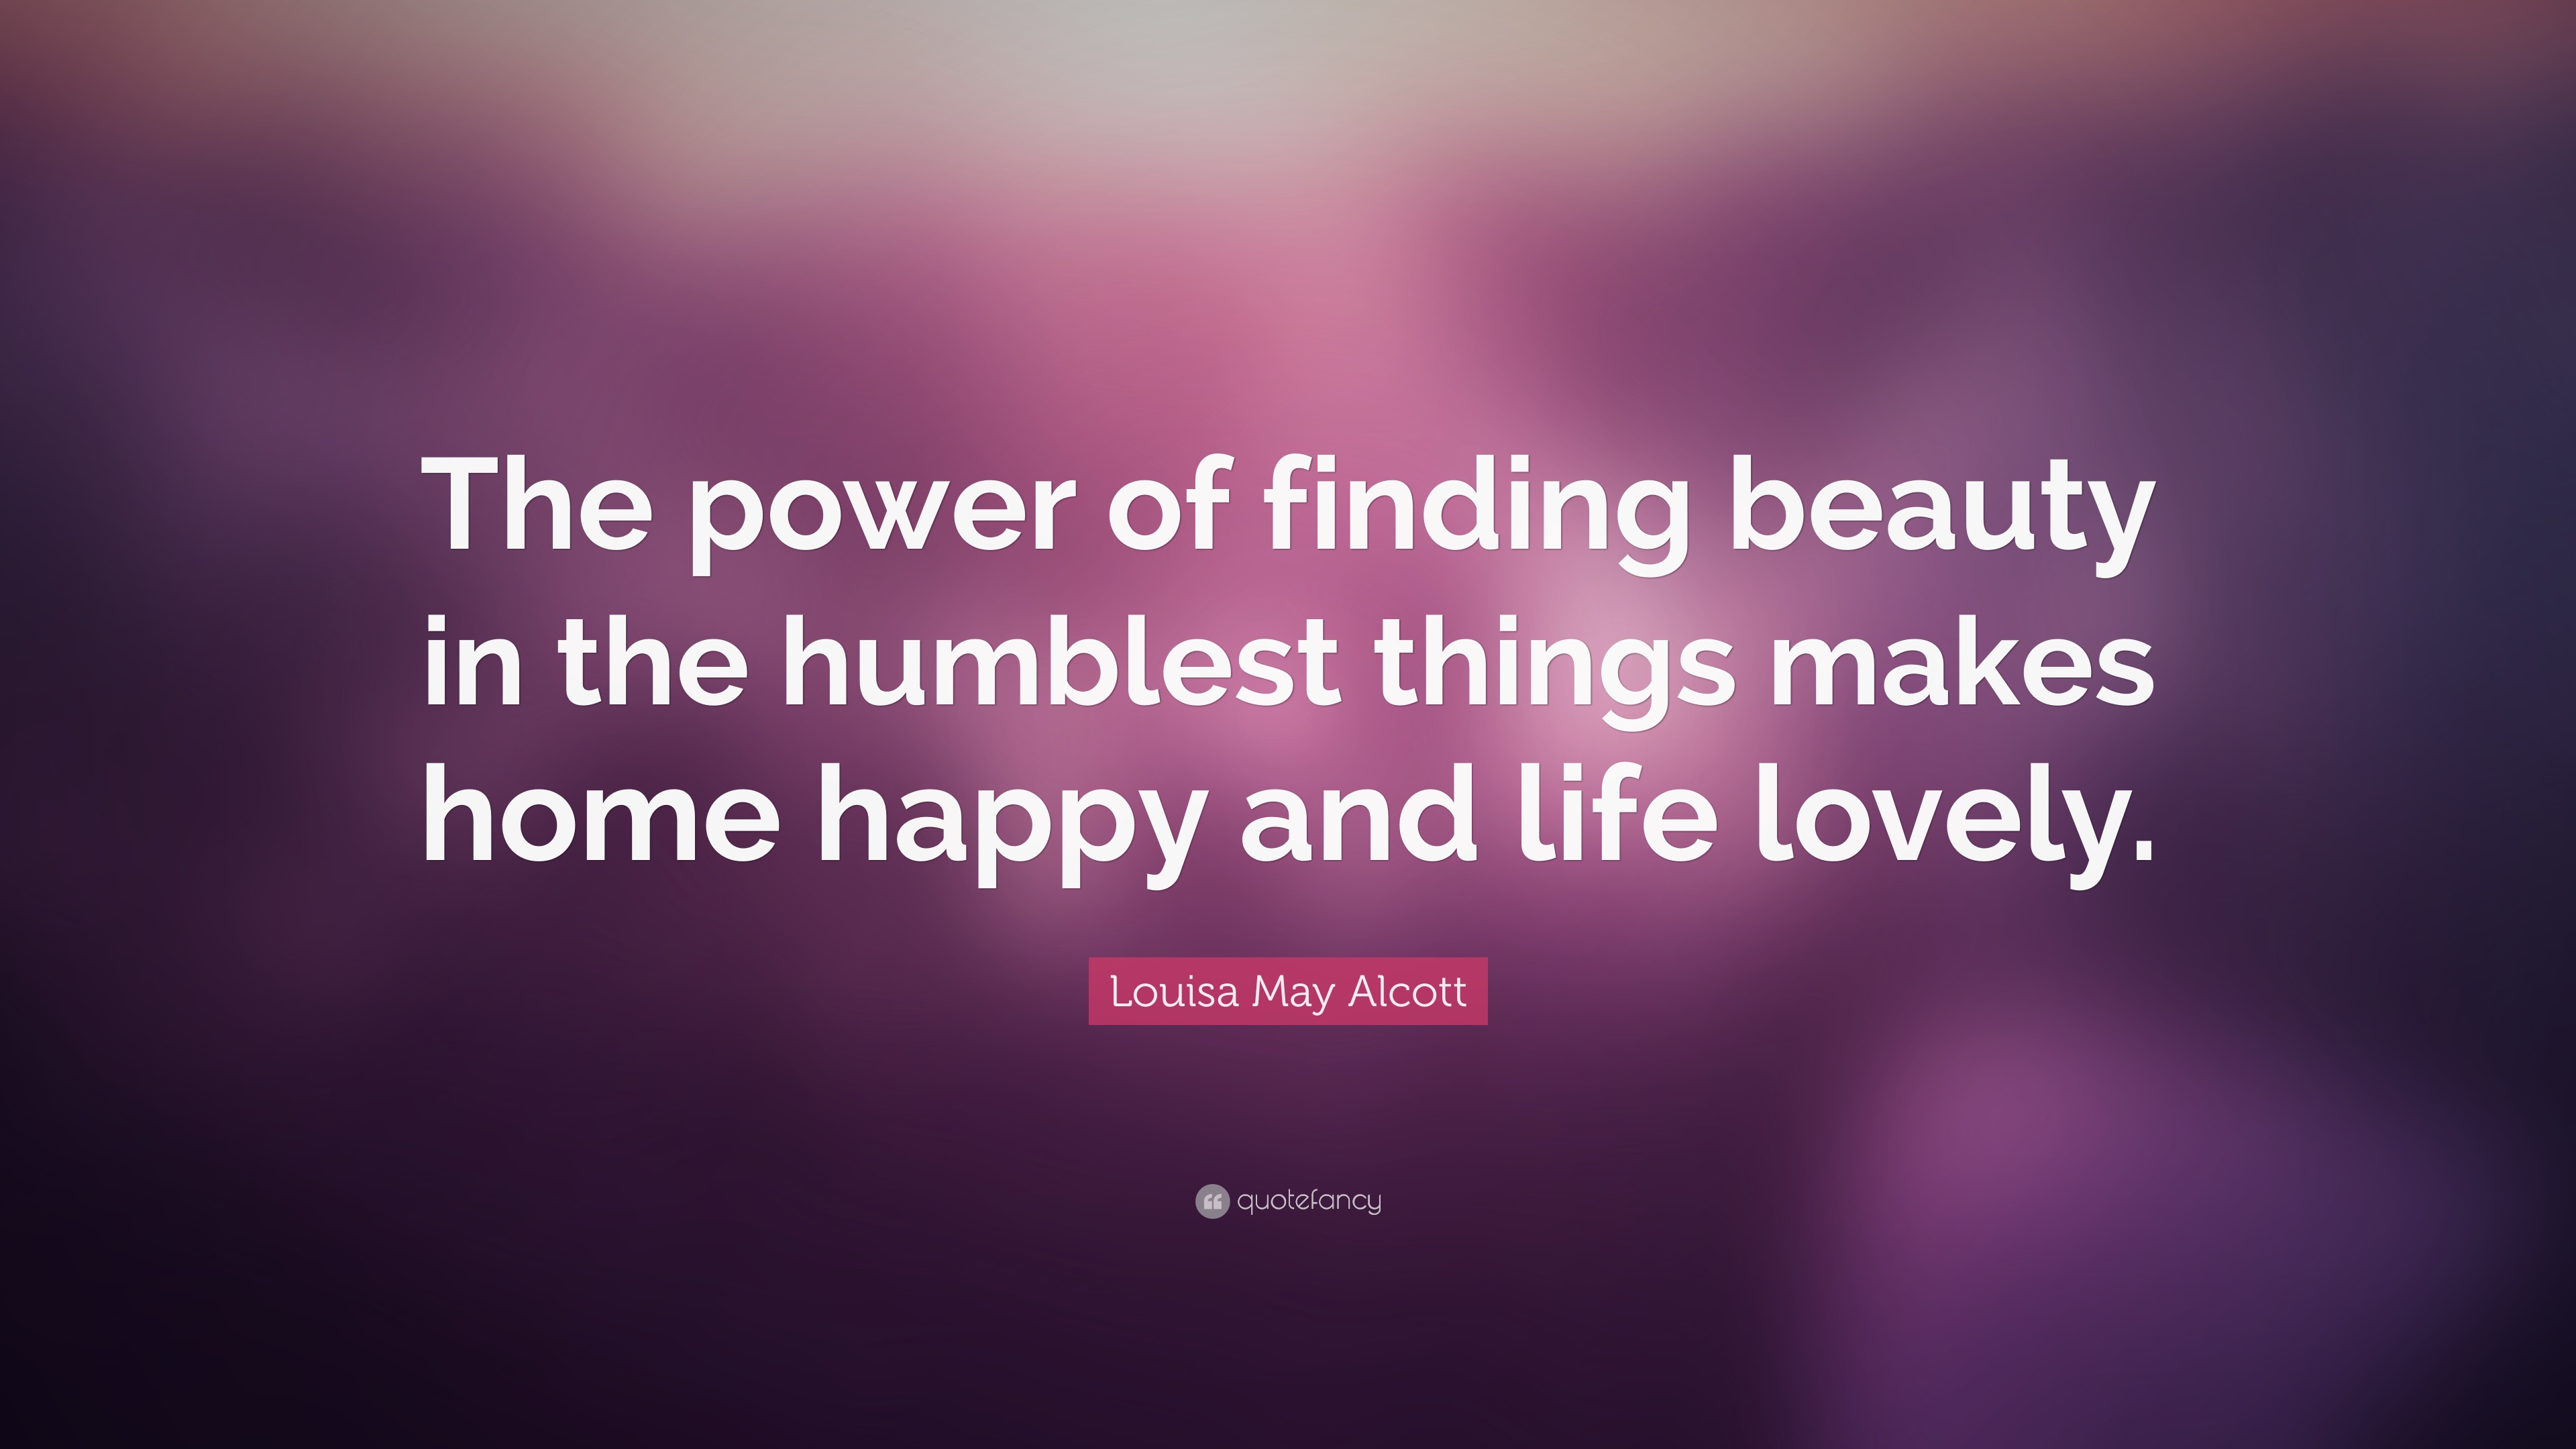 Louisa May Alcott Quote: “The power of finding beauty in the ...